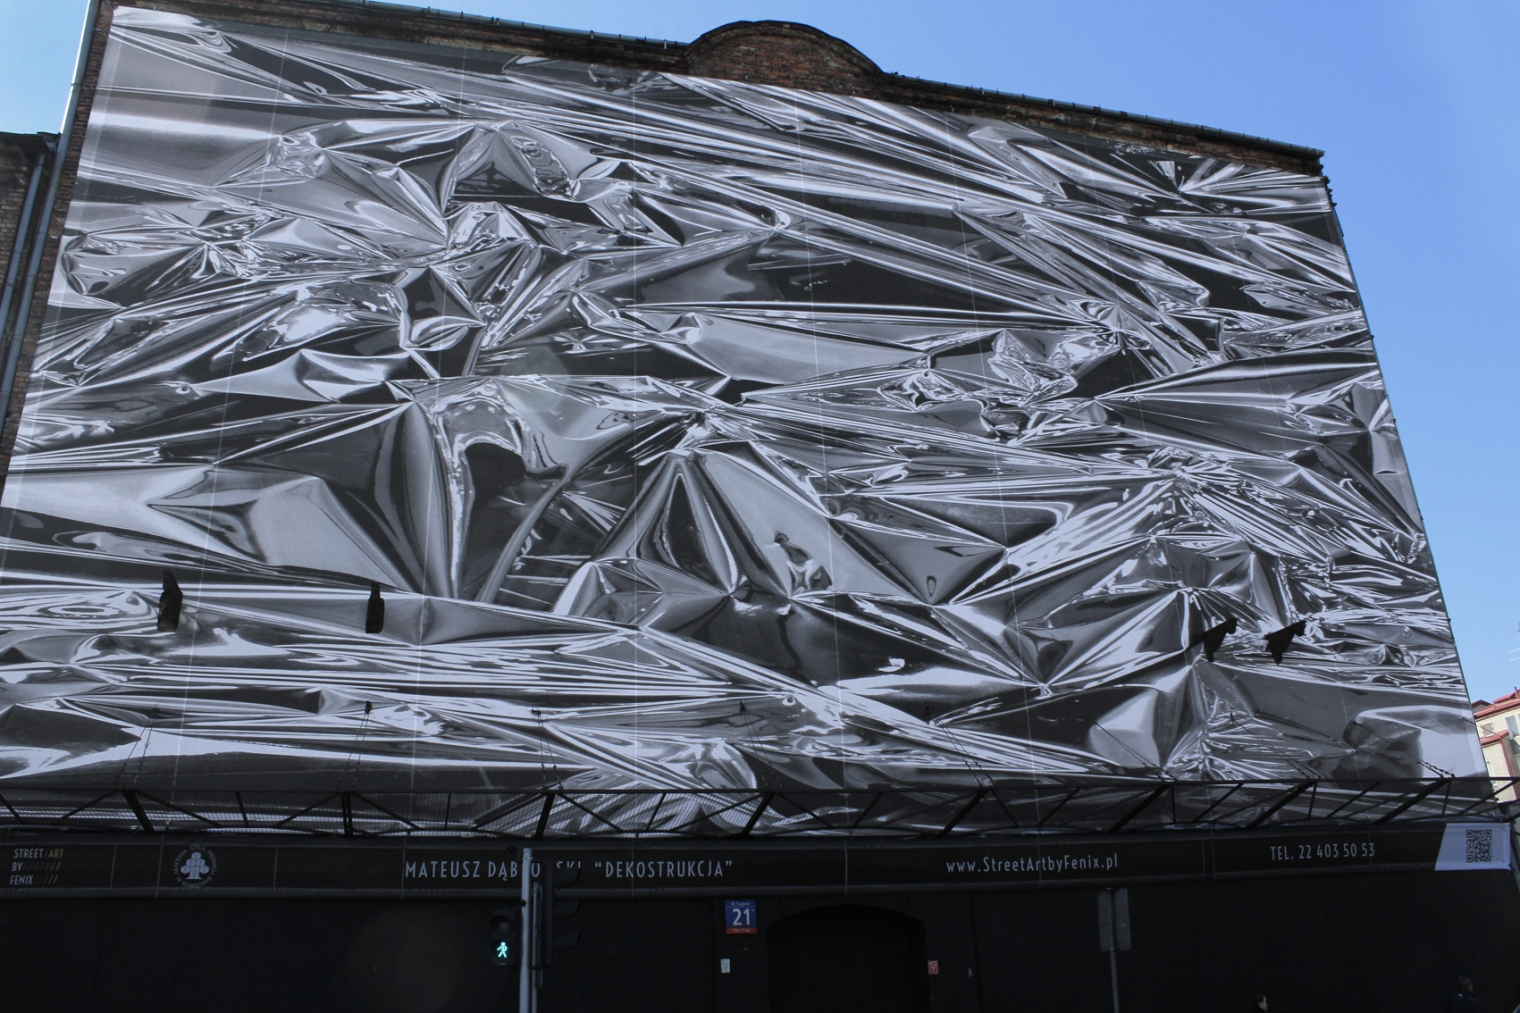 DECONSTRUCTION  Material: print on netting; Dimension: 1400 x 2552 cm and 1400 x 1298 cm; Date: 2013